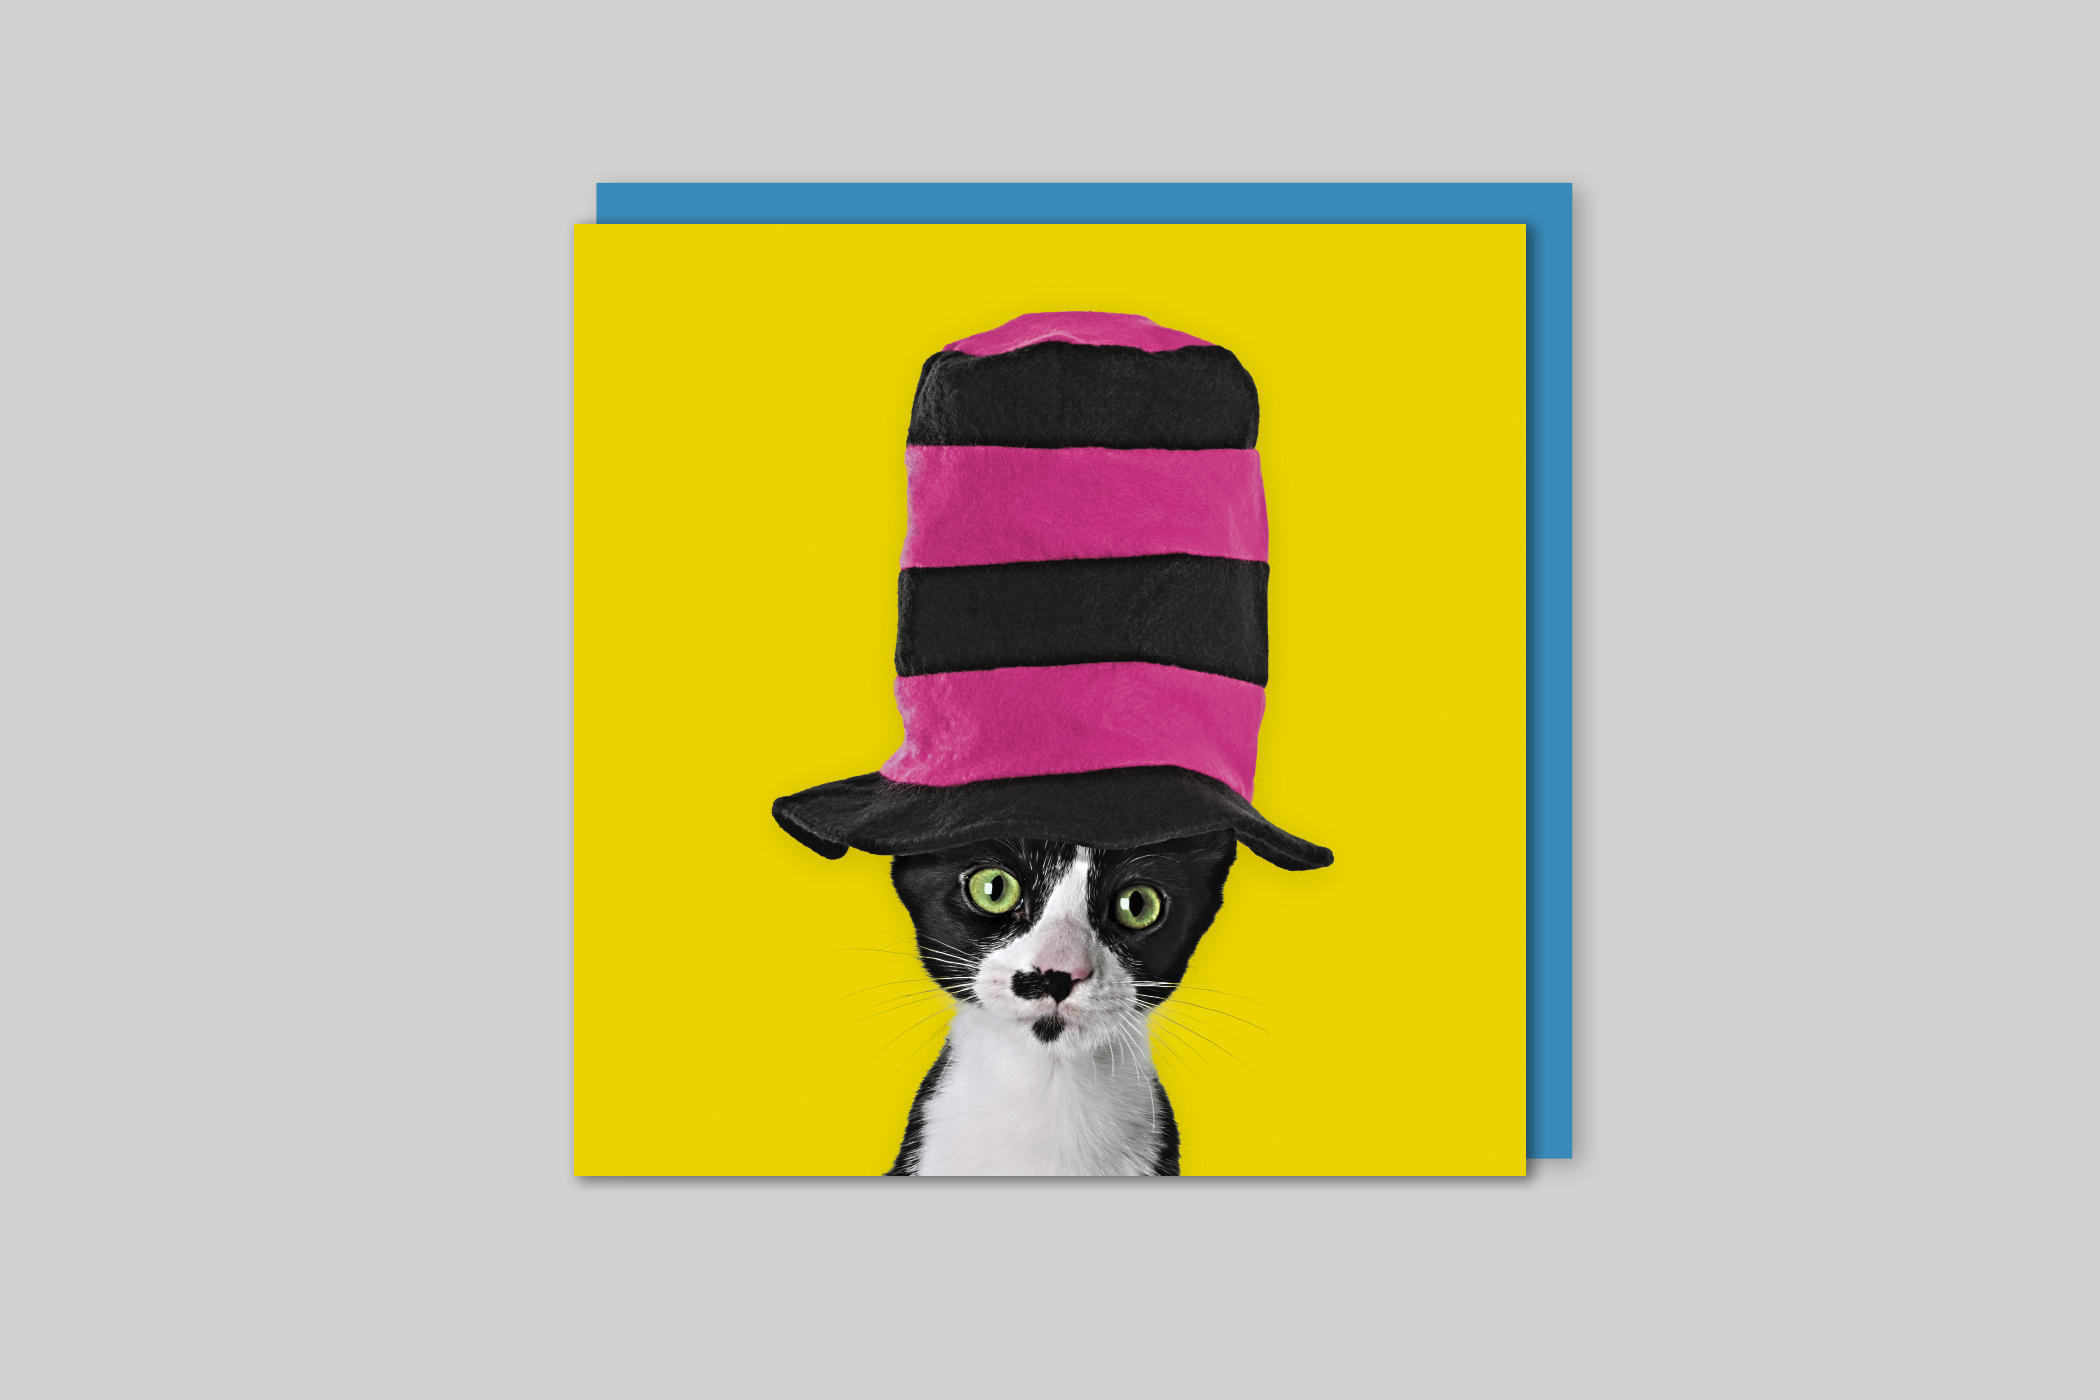 Top Hat from Wildthings range of greeting cards by Icon, back page.